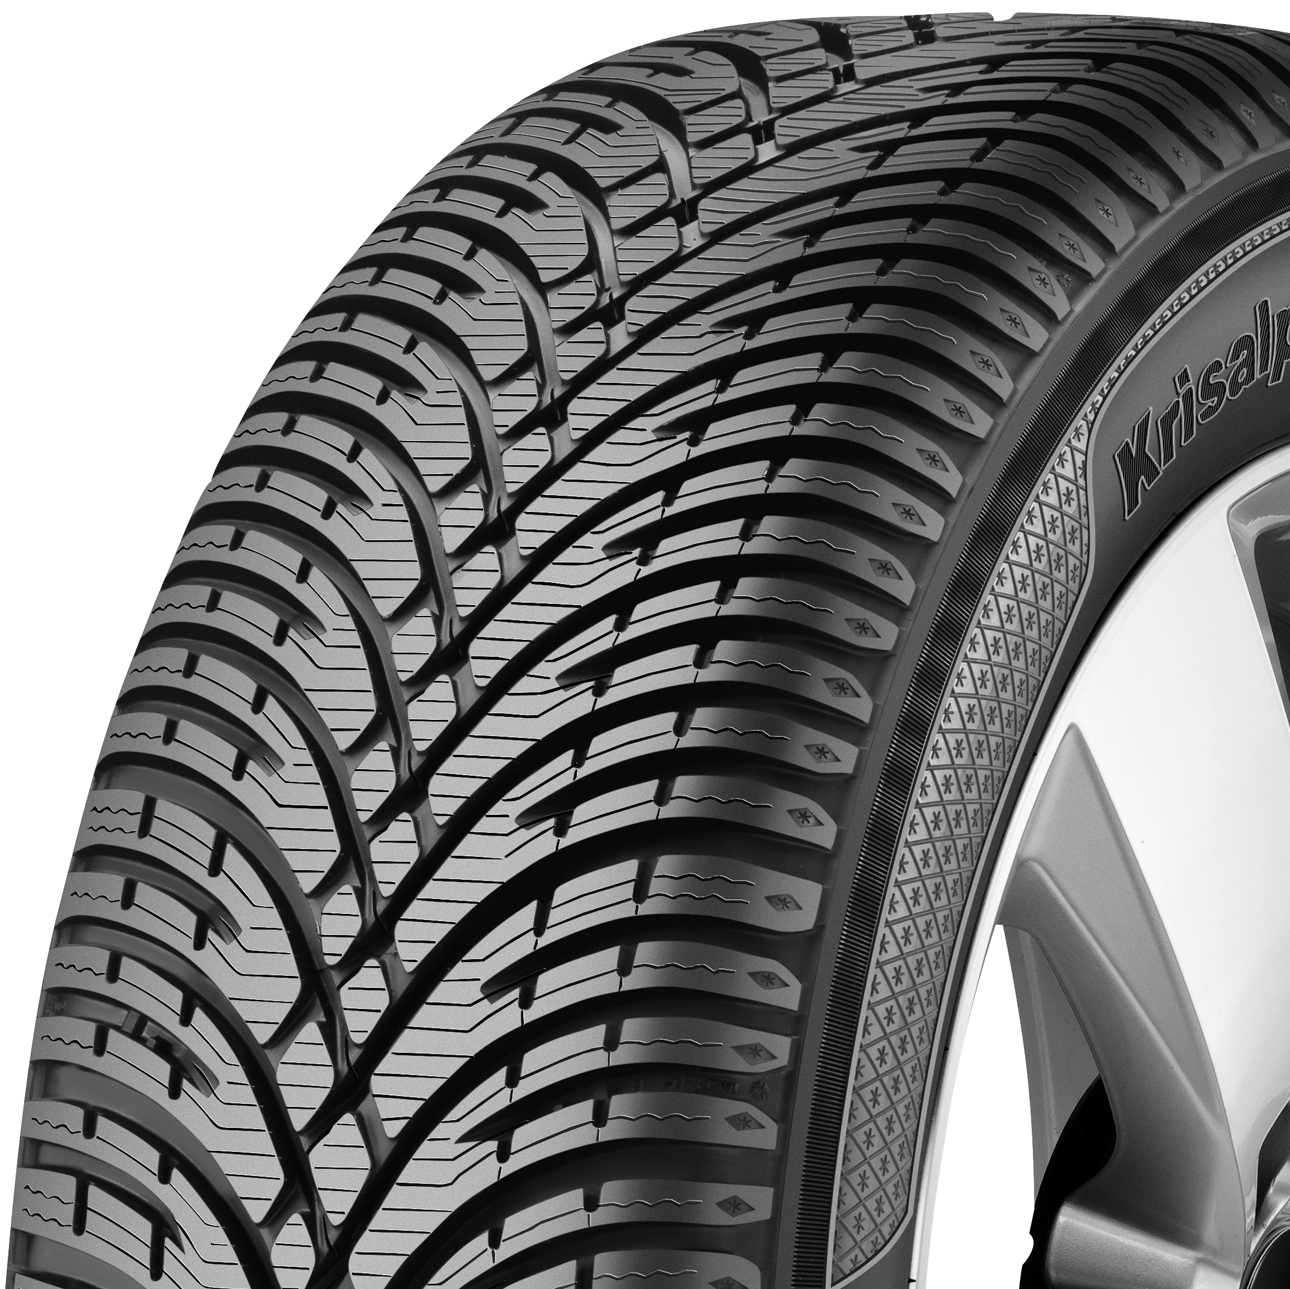 Kleber Krisalp Hp3 Test And Review Of The Winter Tyre Alltyretests Com